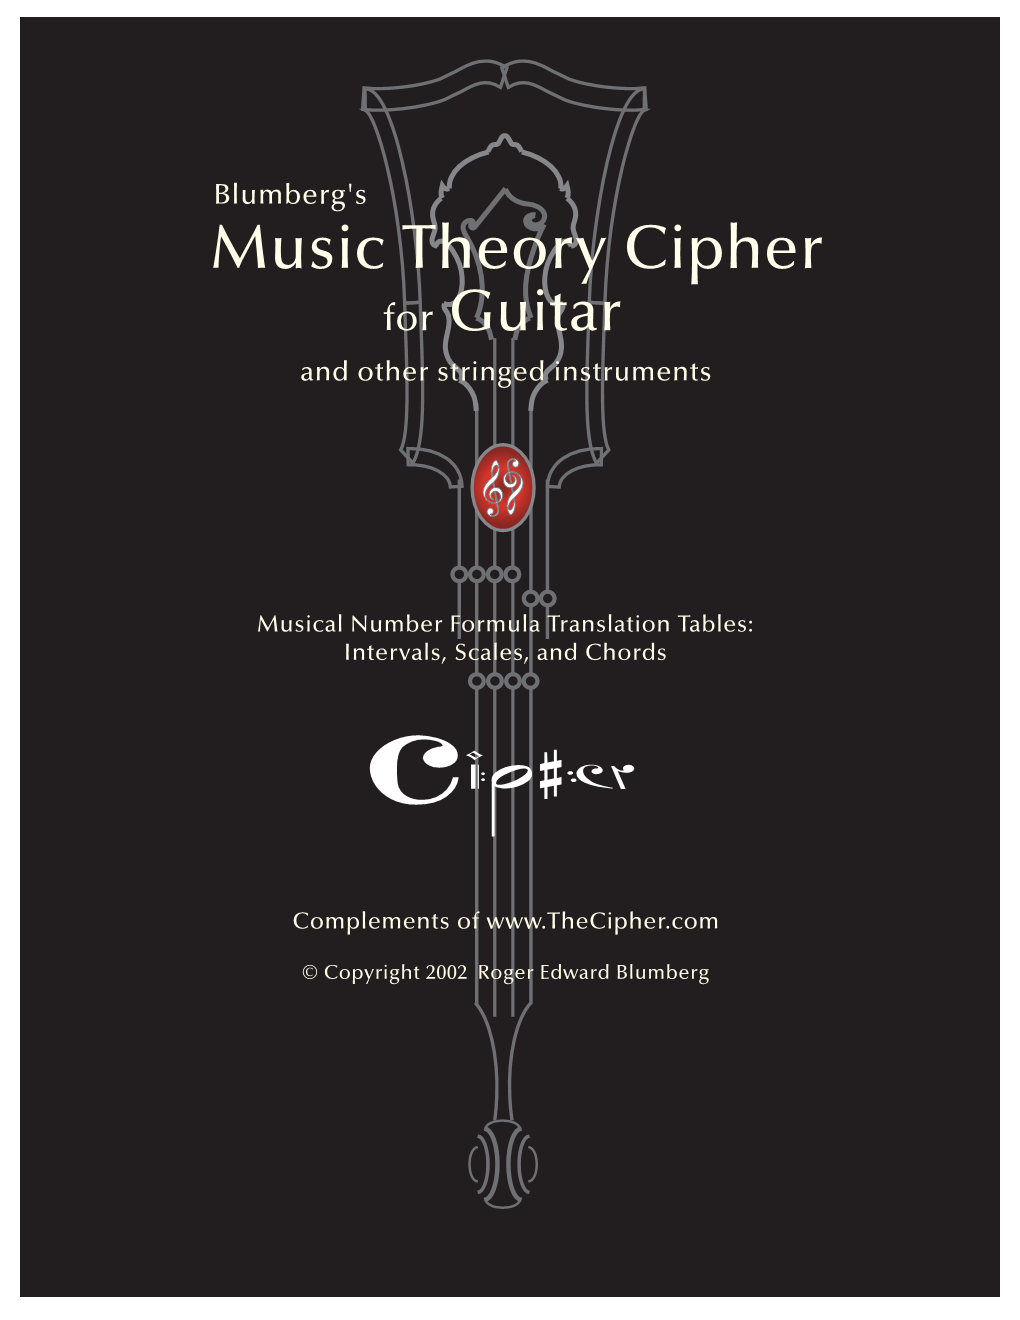 Blumberg's Music Theory Cipher for Guitar and Other Stringed Instruments